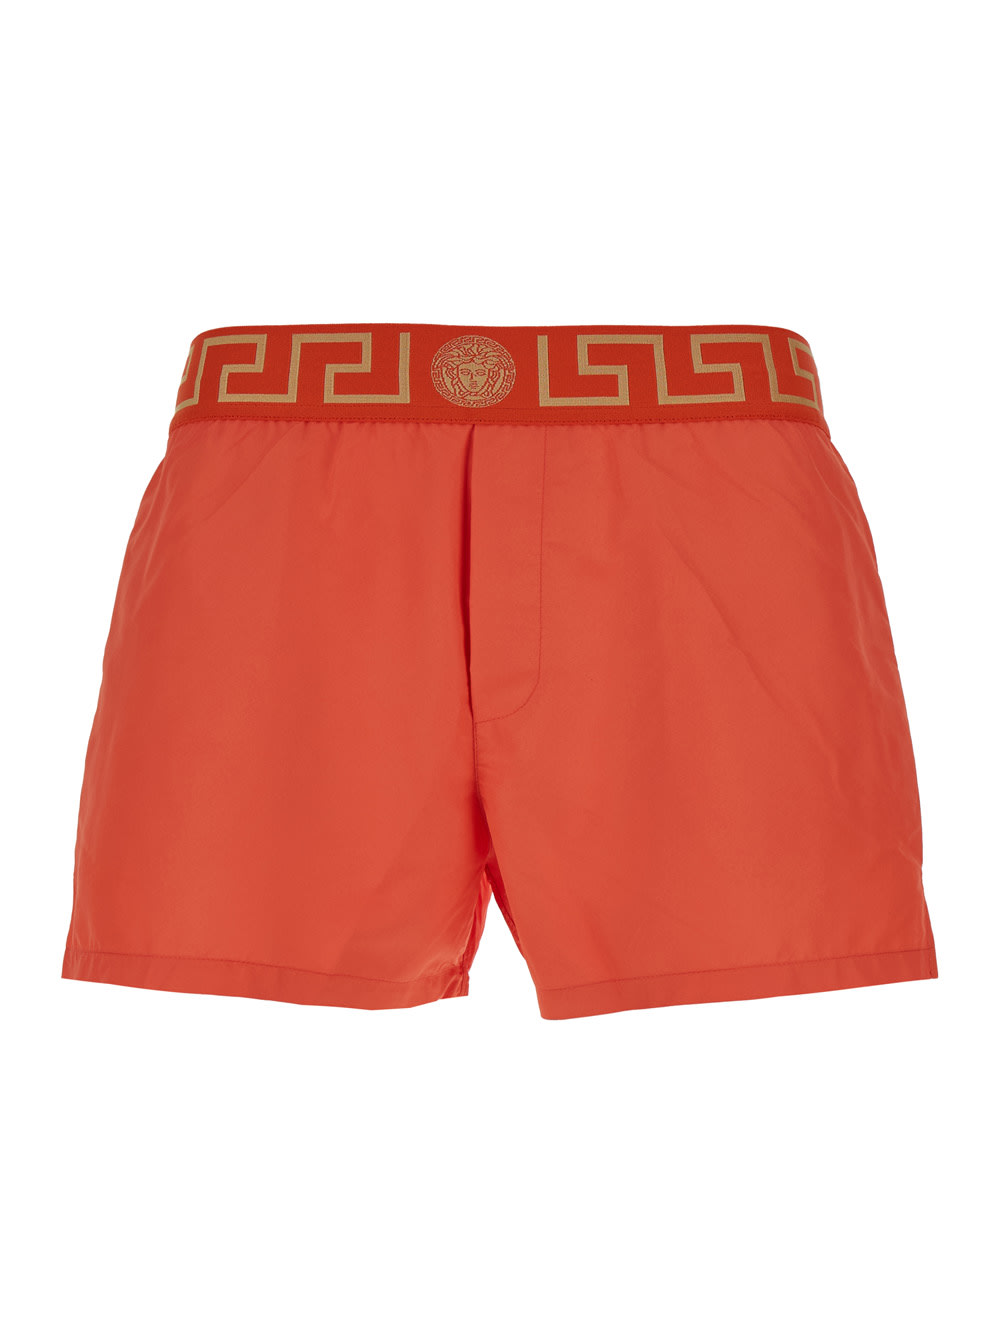 Orange Swimsuit Shorts With Greca Detail In Tech Fabric Man